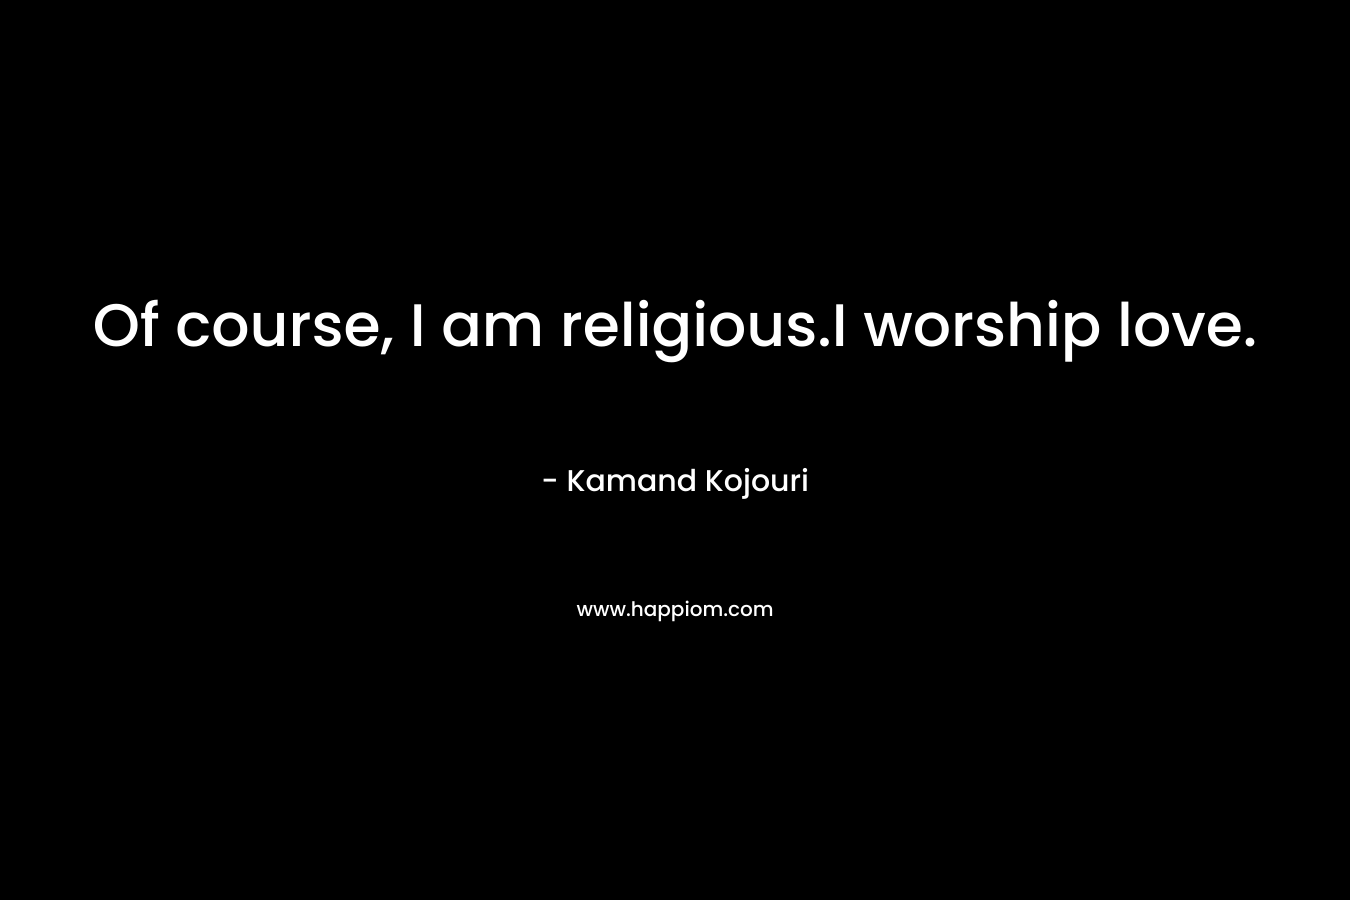 Of course, I am religious.I worship love.